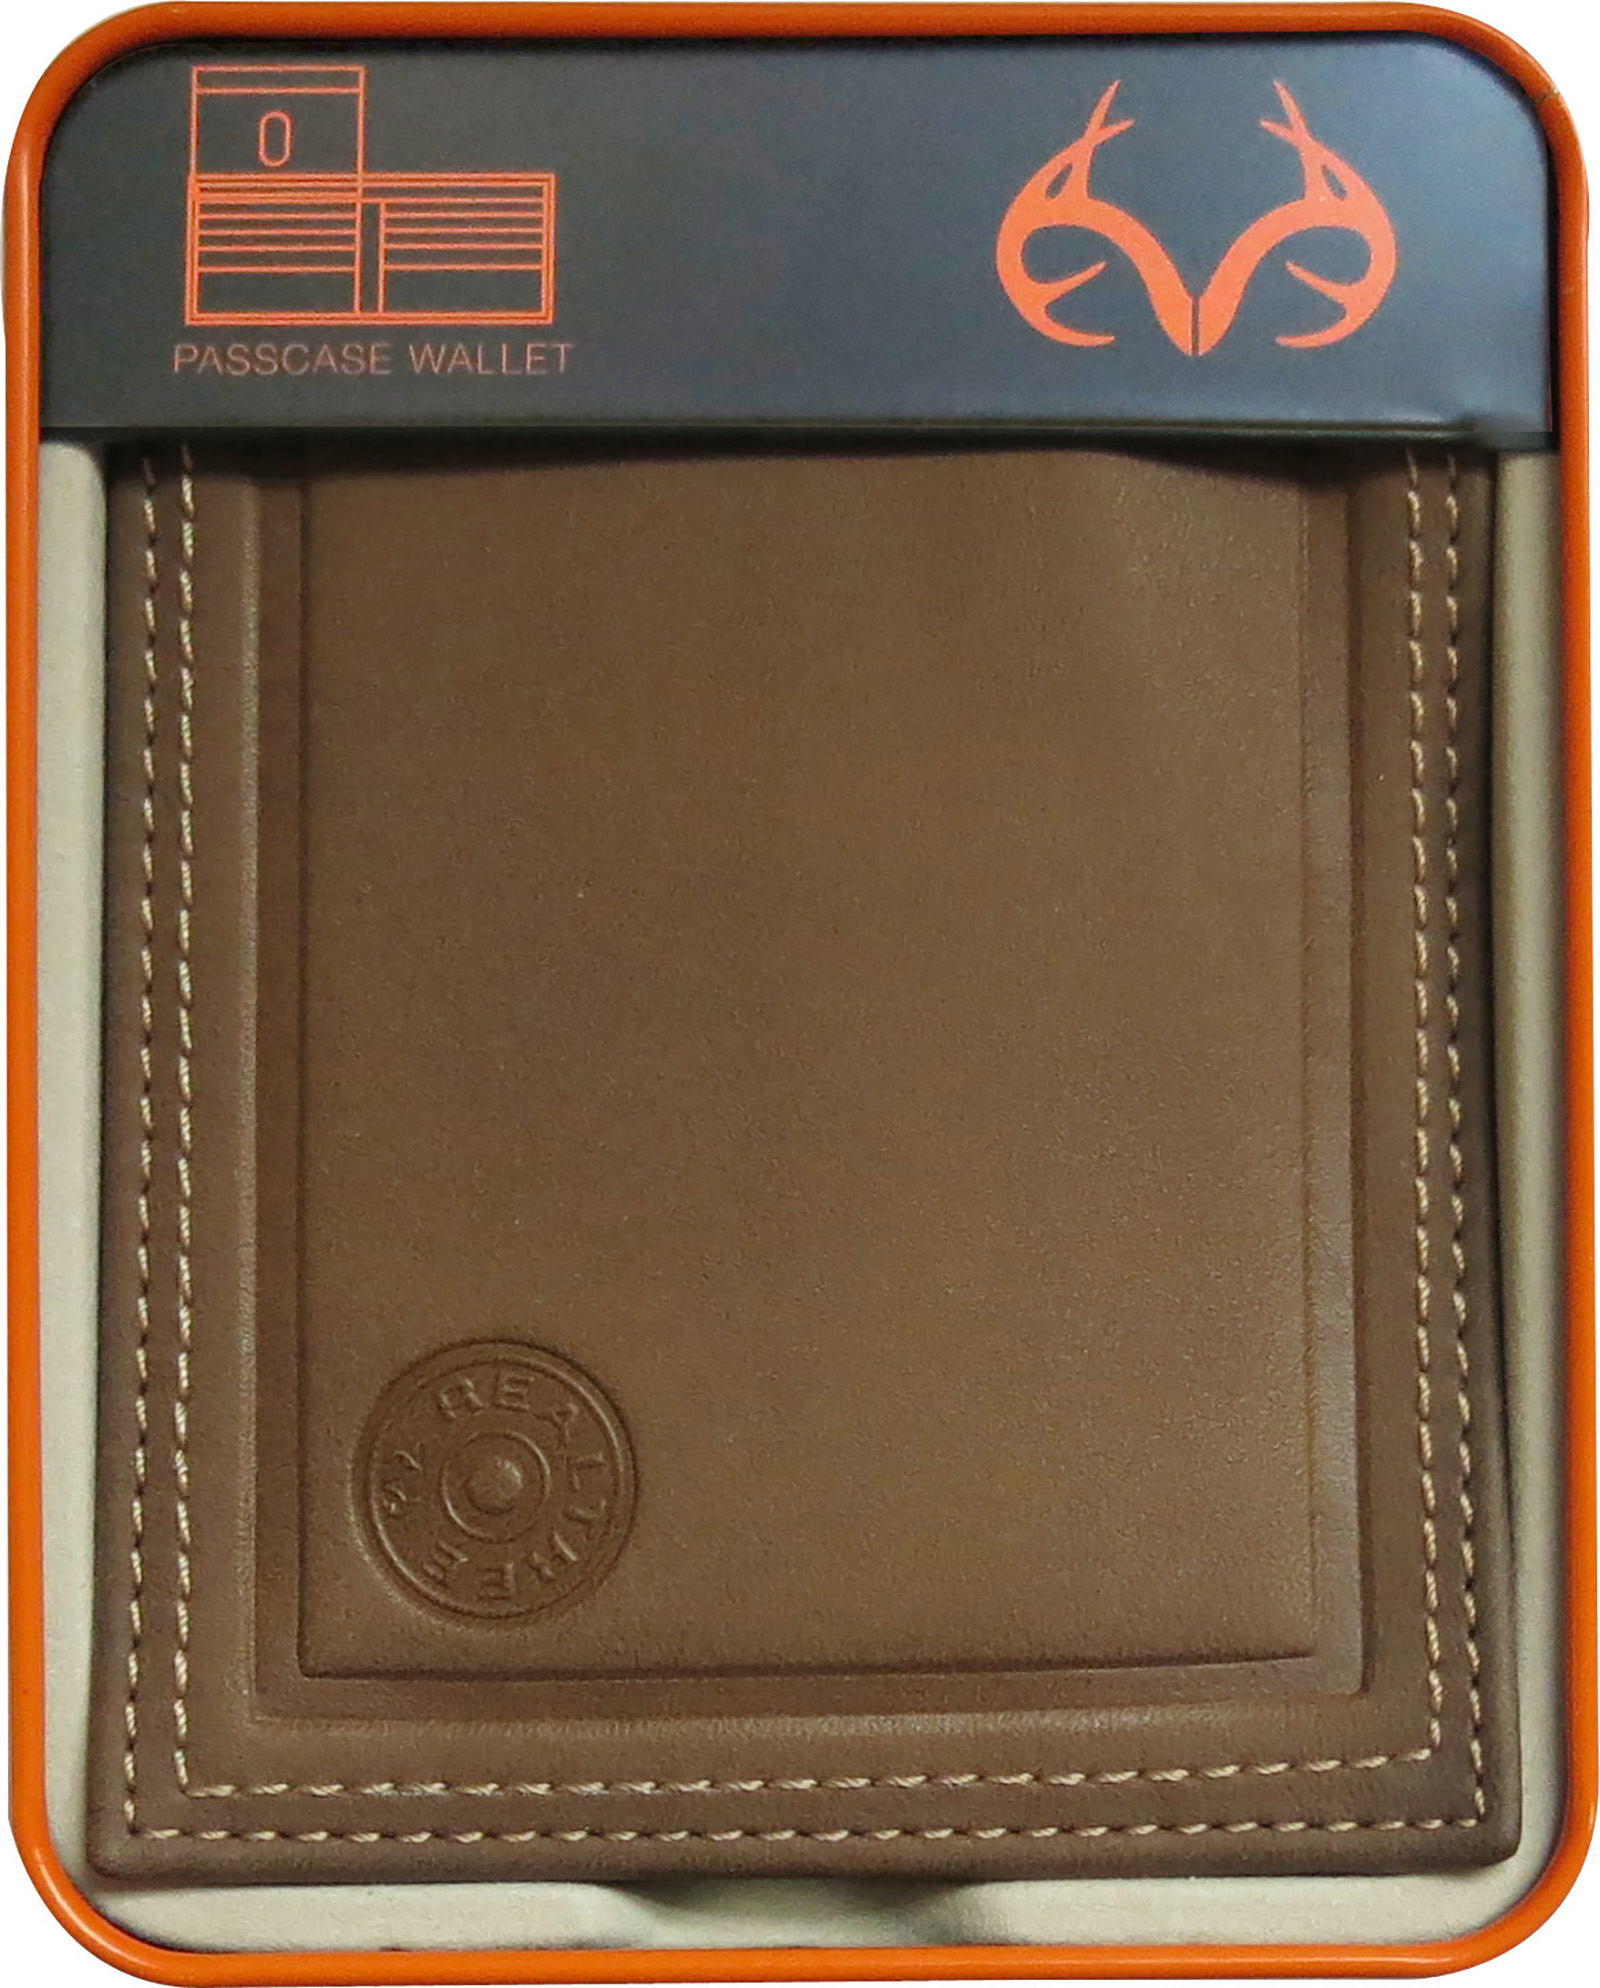 Realtree Double contrast Stitched tan leather Passcase wallet with Embossed shot shell logo